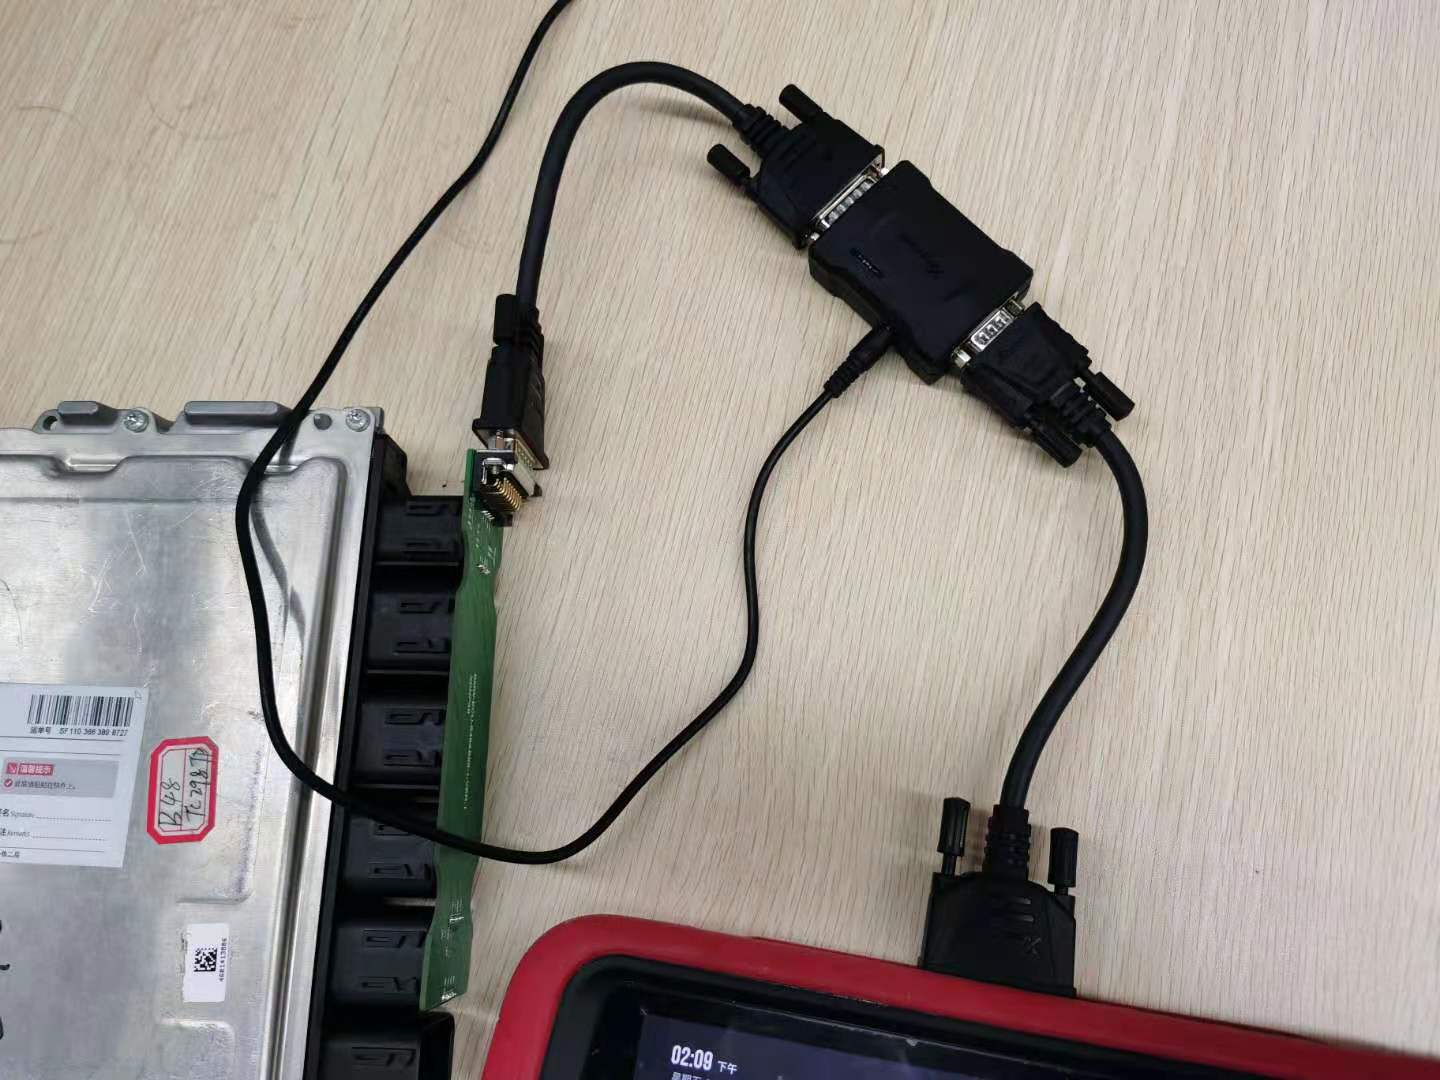 How to Connect XDNP30 ECU Adapter with VVDI Key Tool Plus